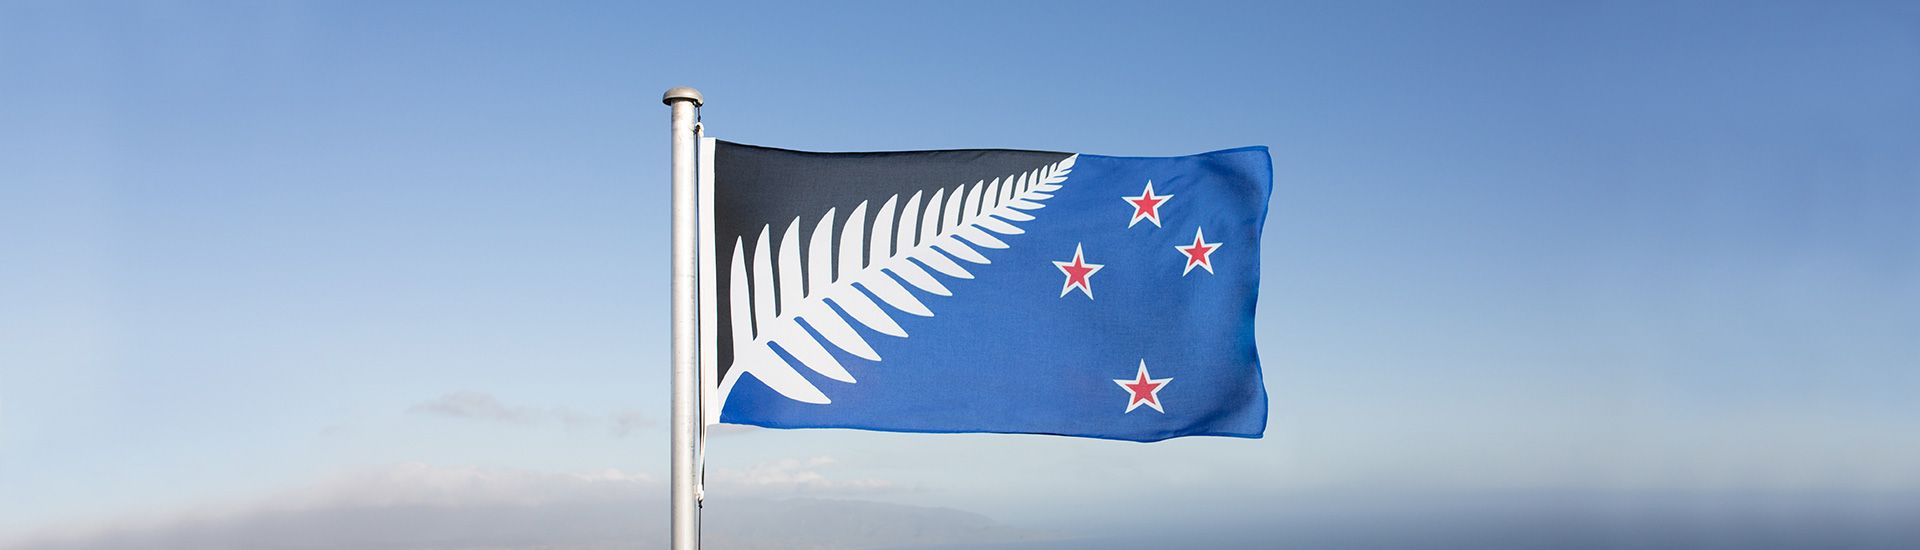 If New Zealand Changed Its Flag